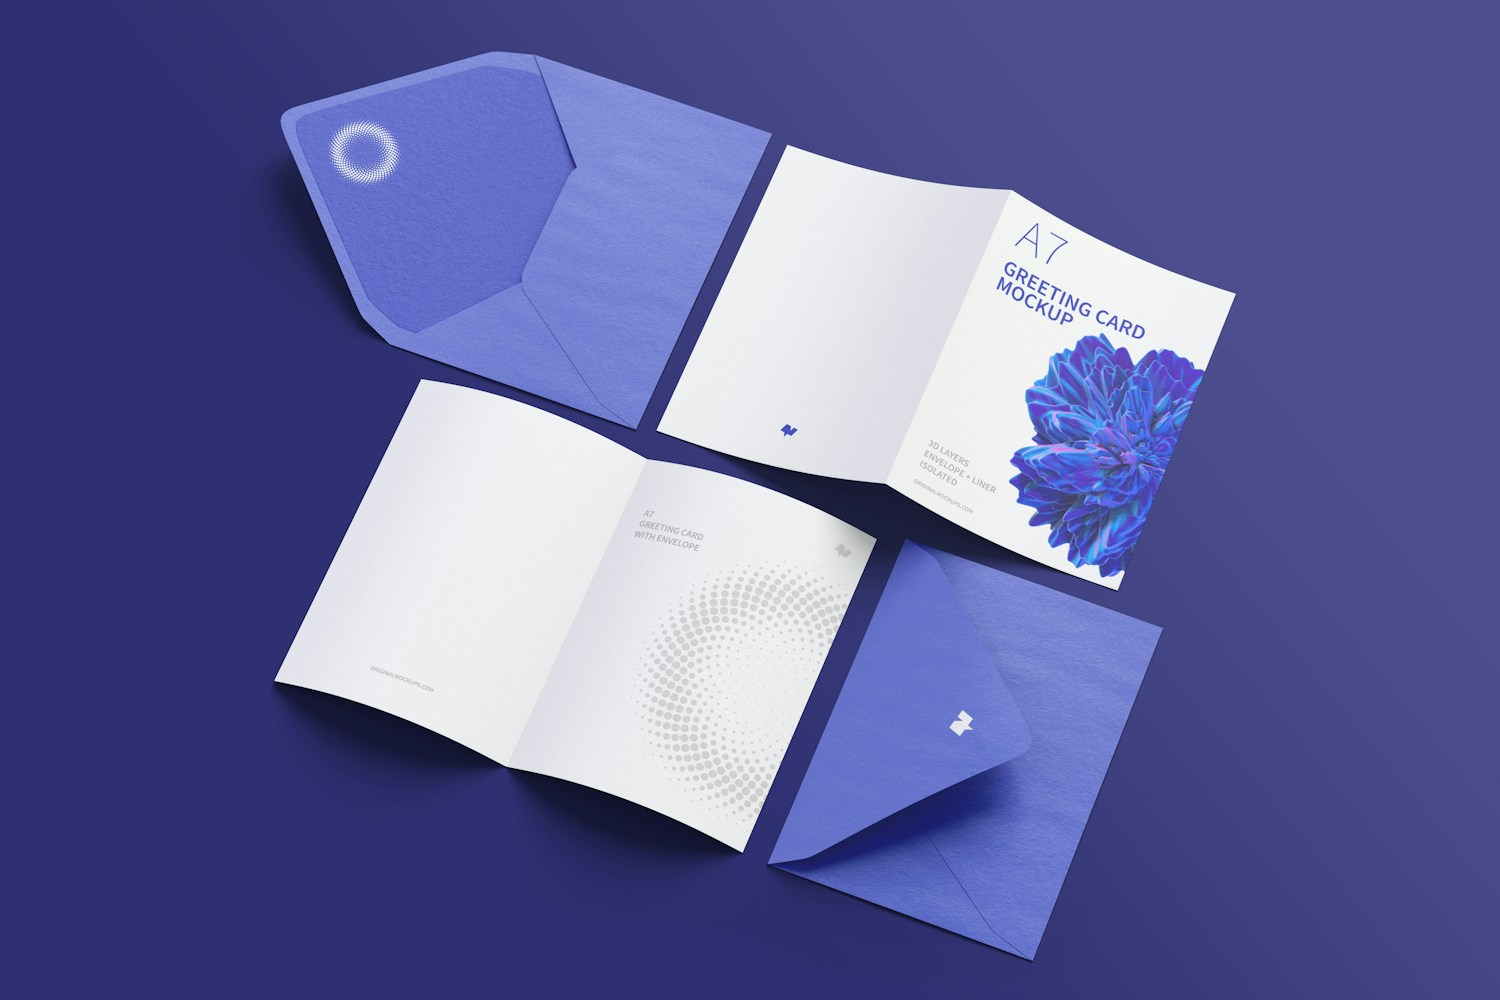 A7 Greeting Card Mockup with Envelope, Spread Exterior, and Interior Pages